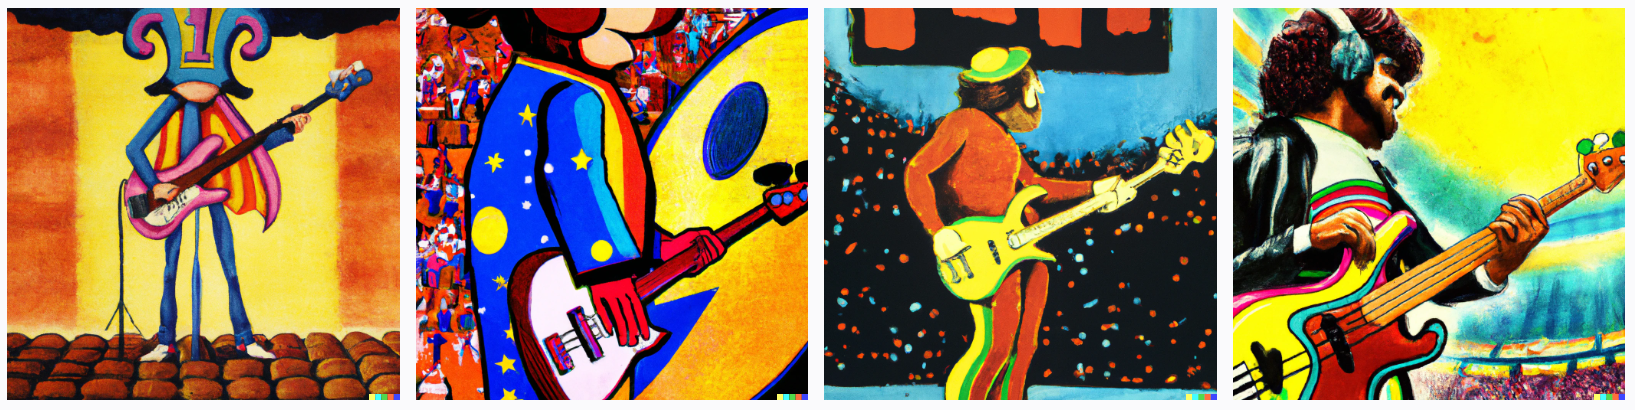 man playing the electric bass in a stadium wearing a muffin costume pop art painting 1979